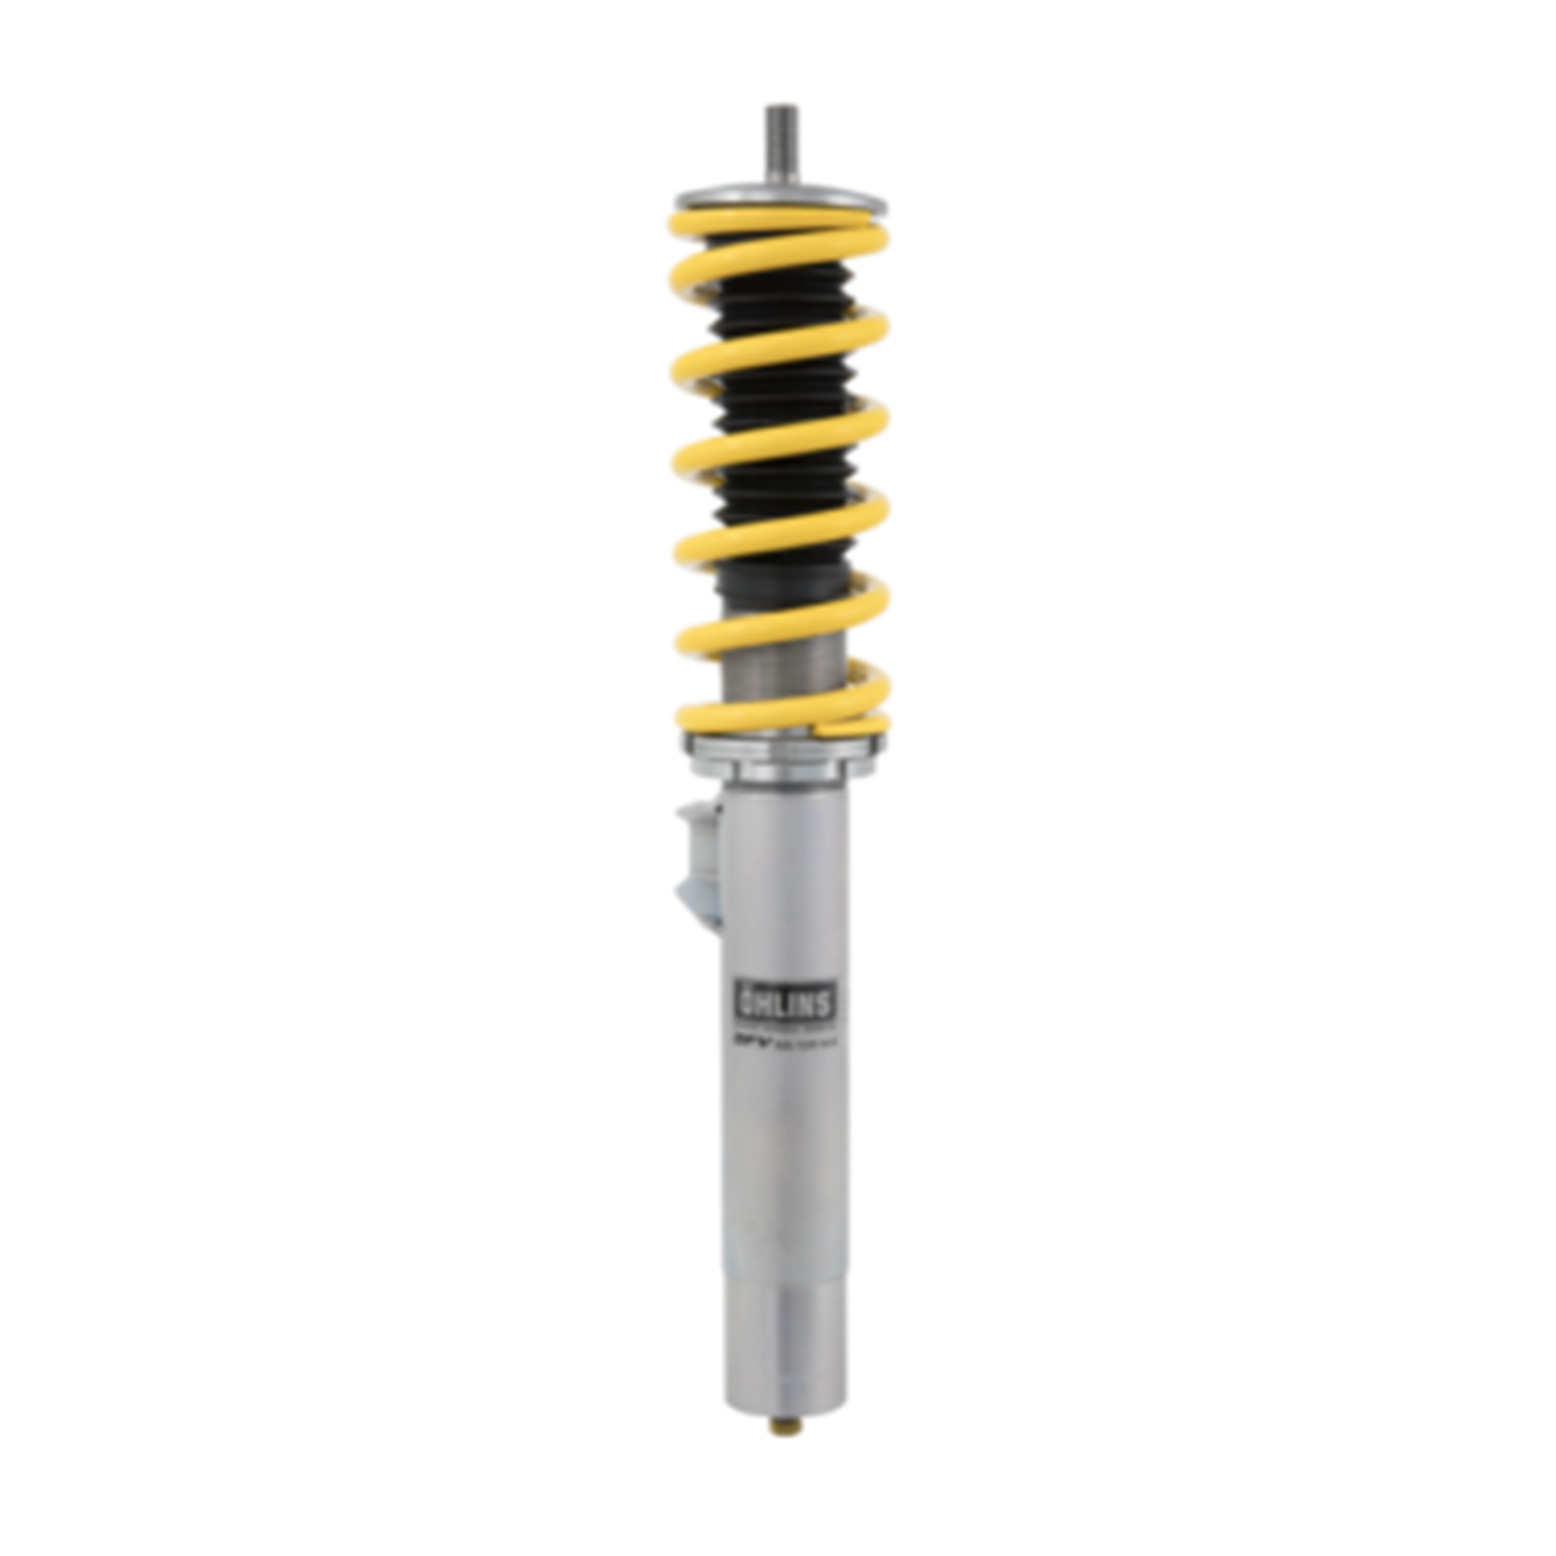 BMW Ohlins Road and Track Coilovers 135i 2006-2011, 335i 2006-2011